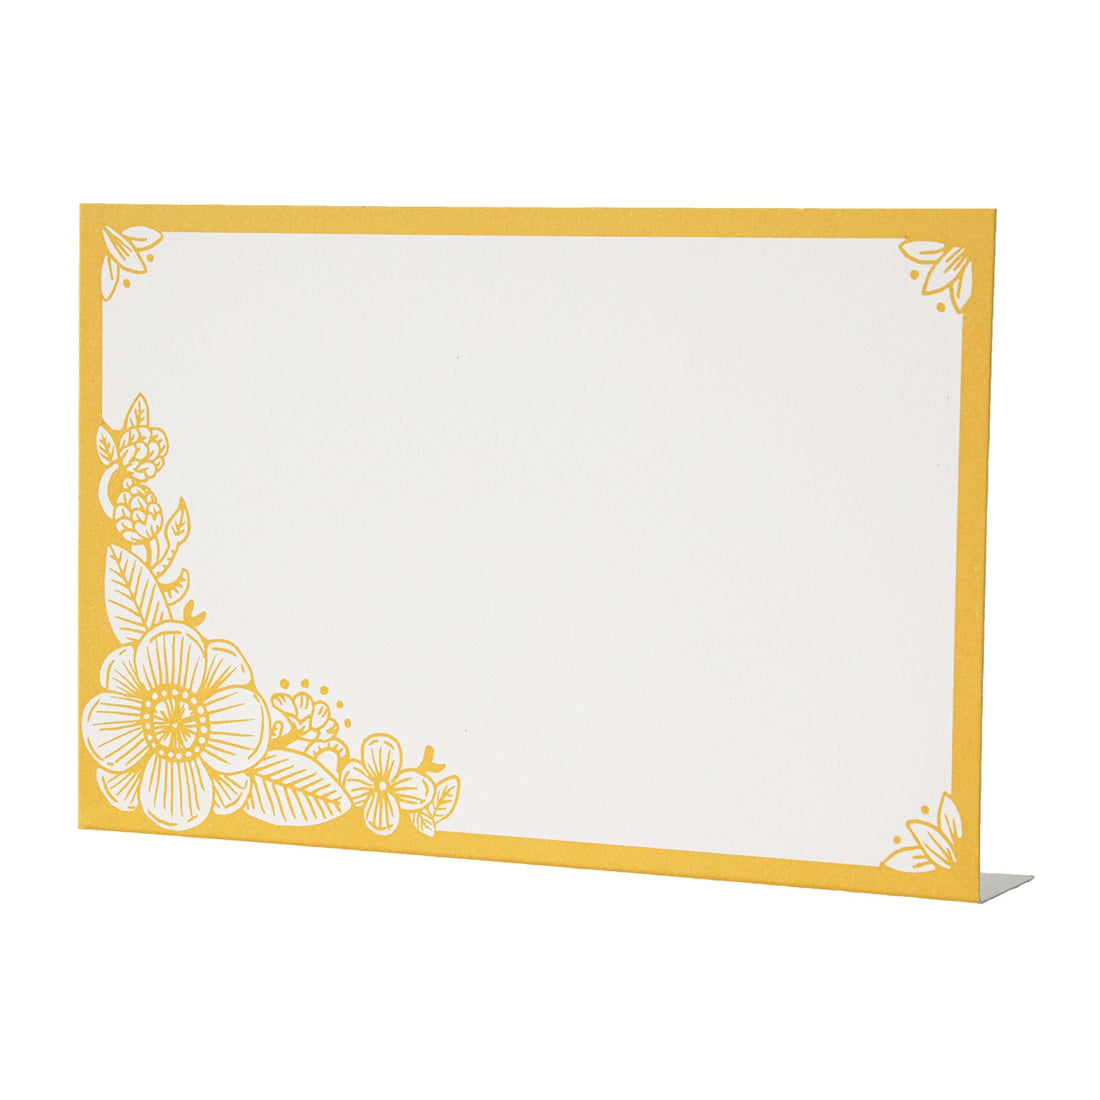 A free-standing, rectangular white table card with a marigold yellow frame around the edges, embellished with yellow linework flower designs in the corners.